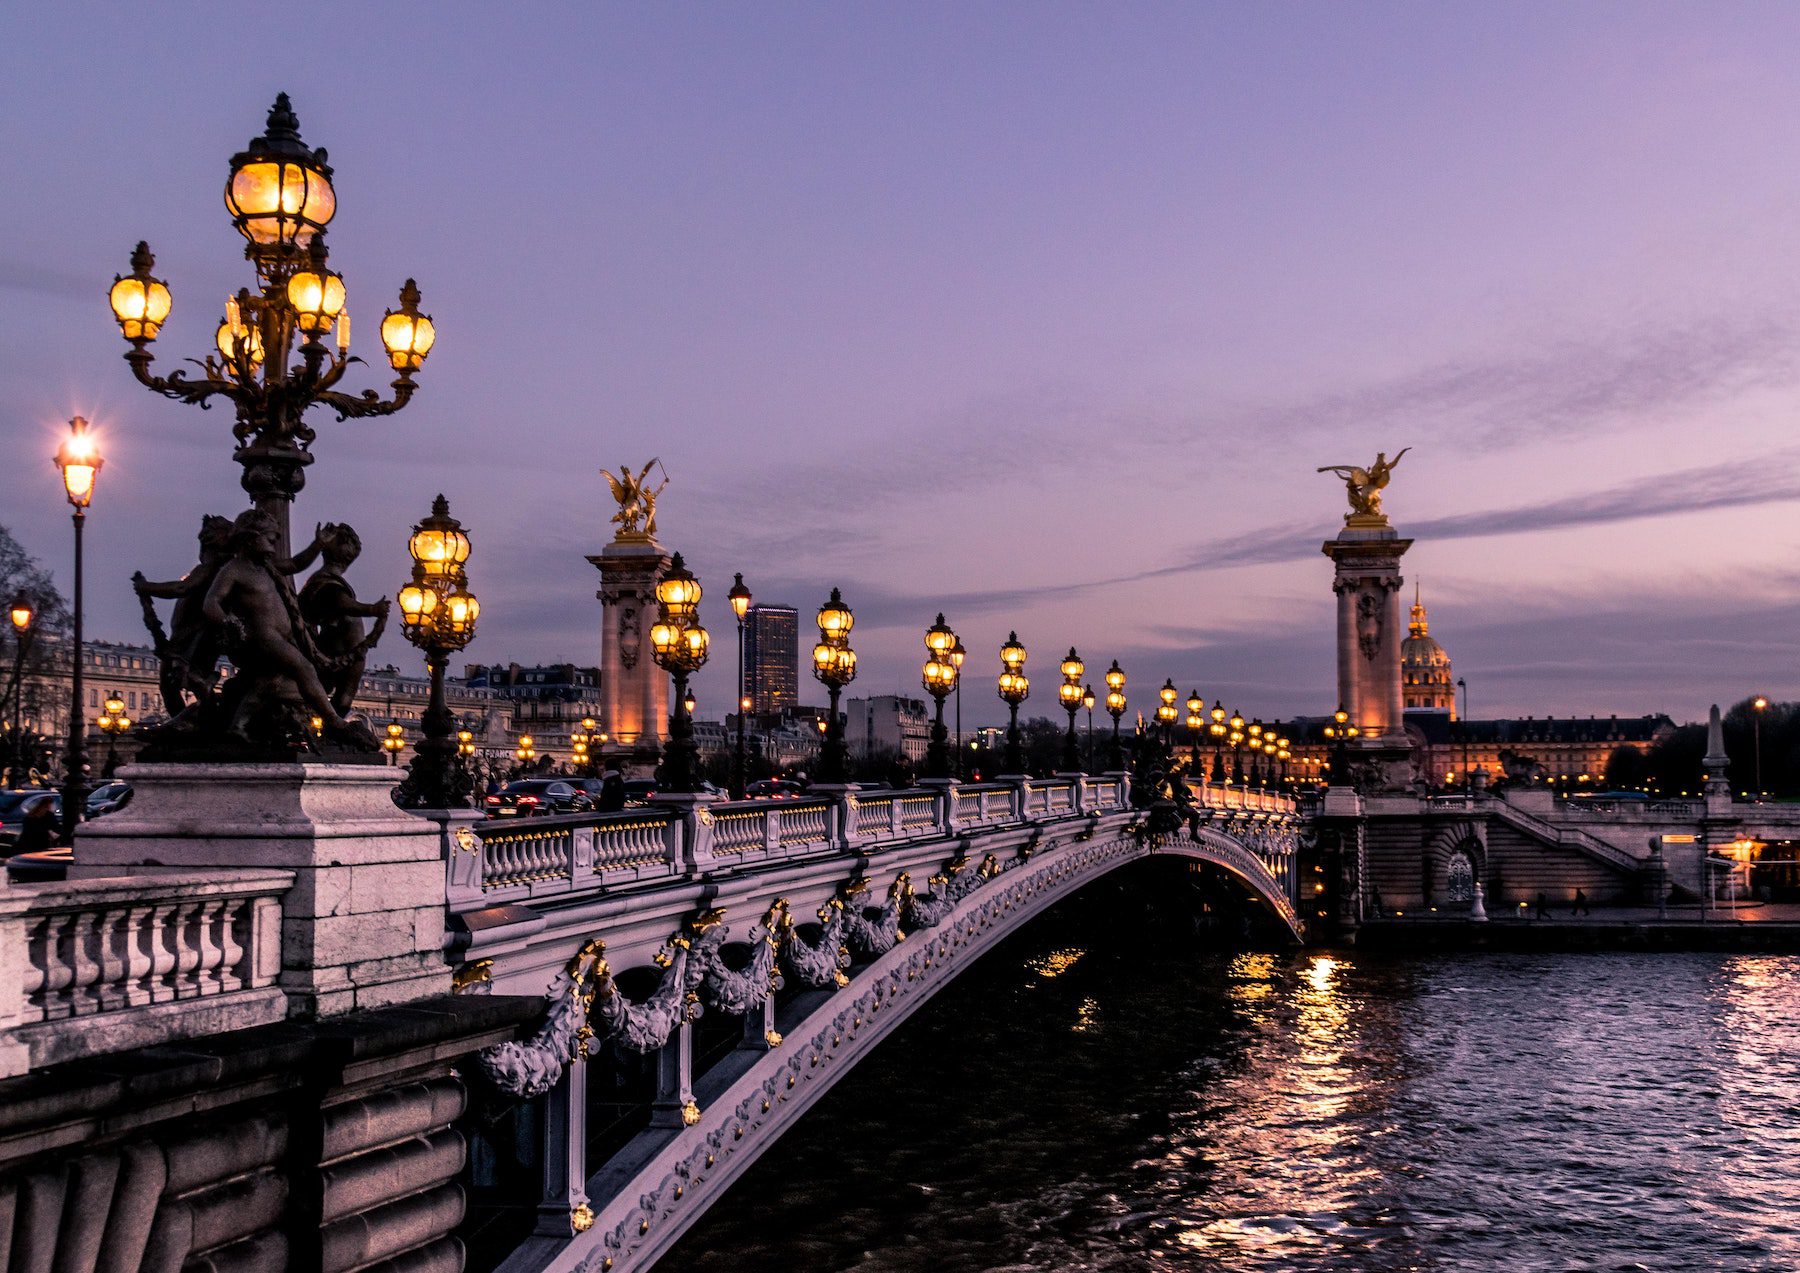 An antique style street-lamp lit white bridge extends across the water on an evening in Paris